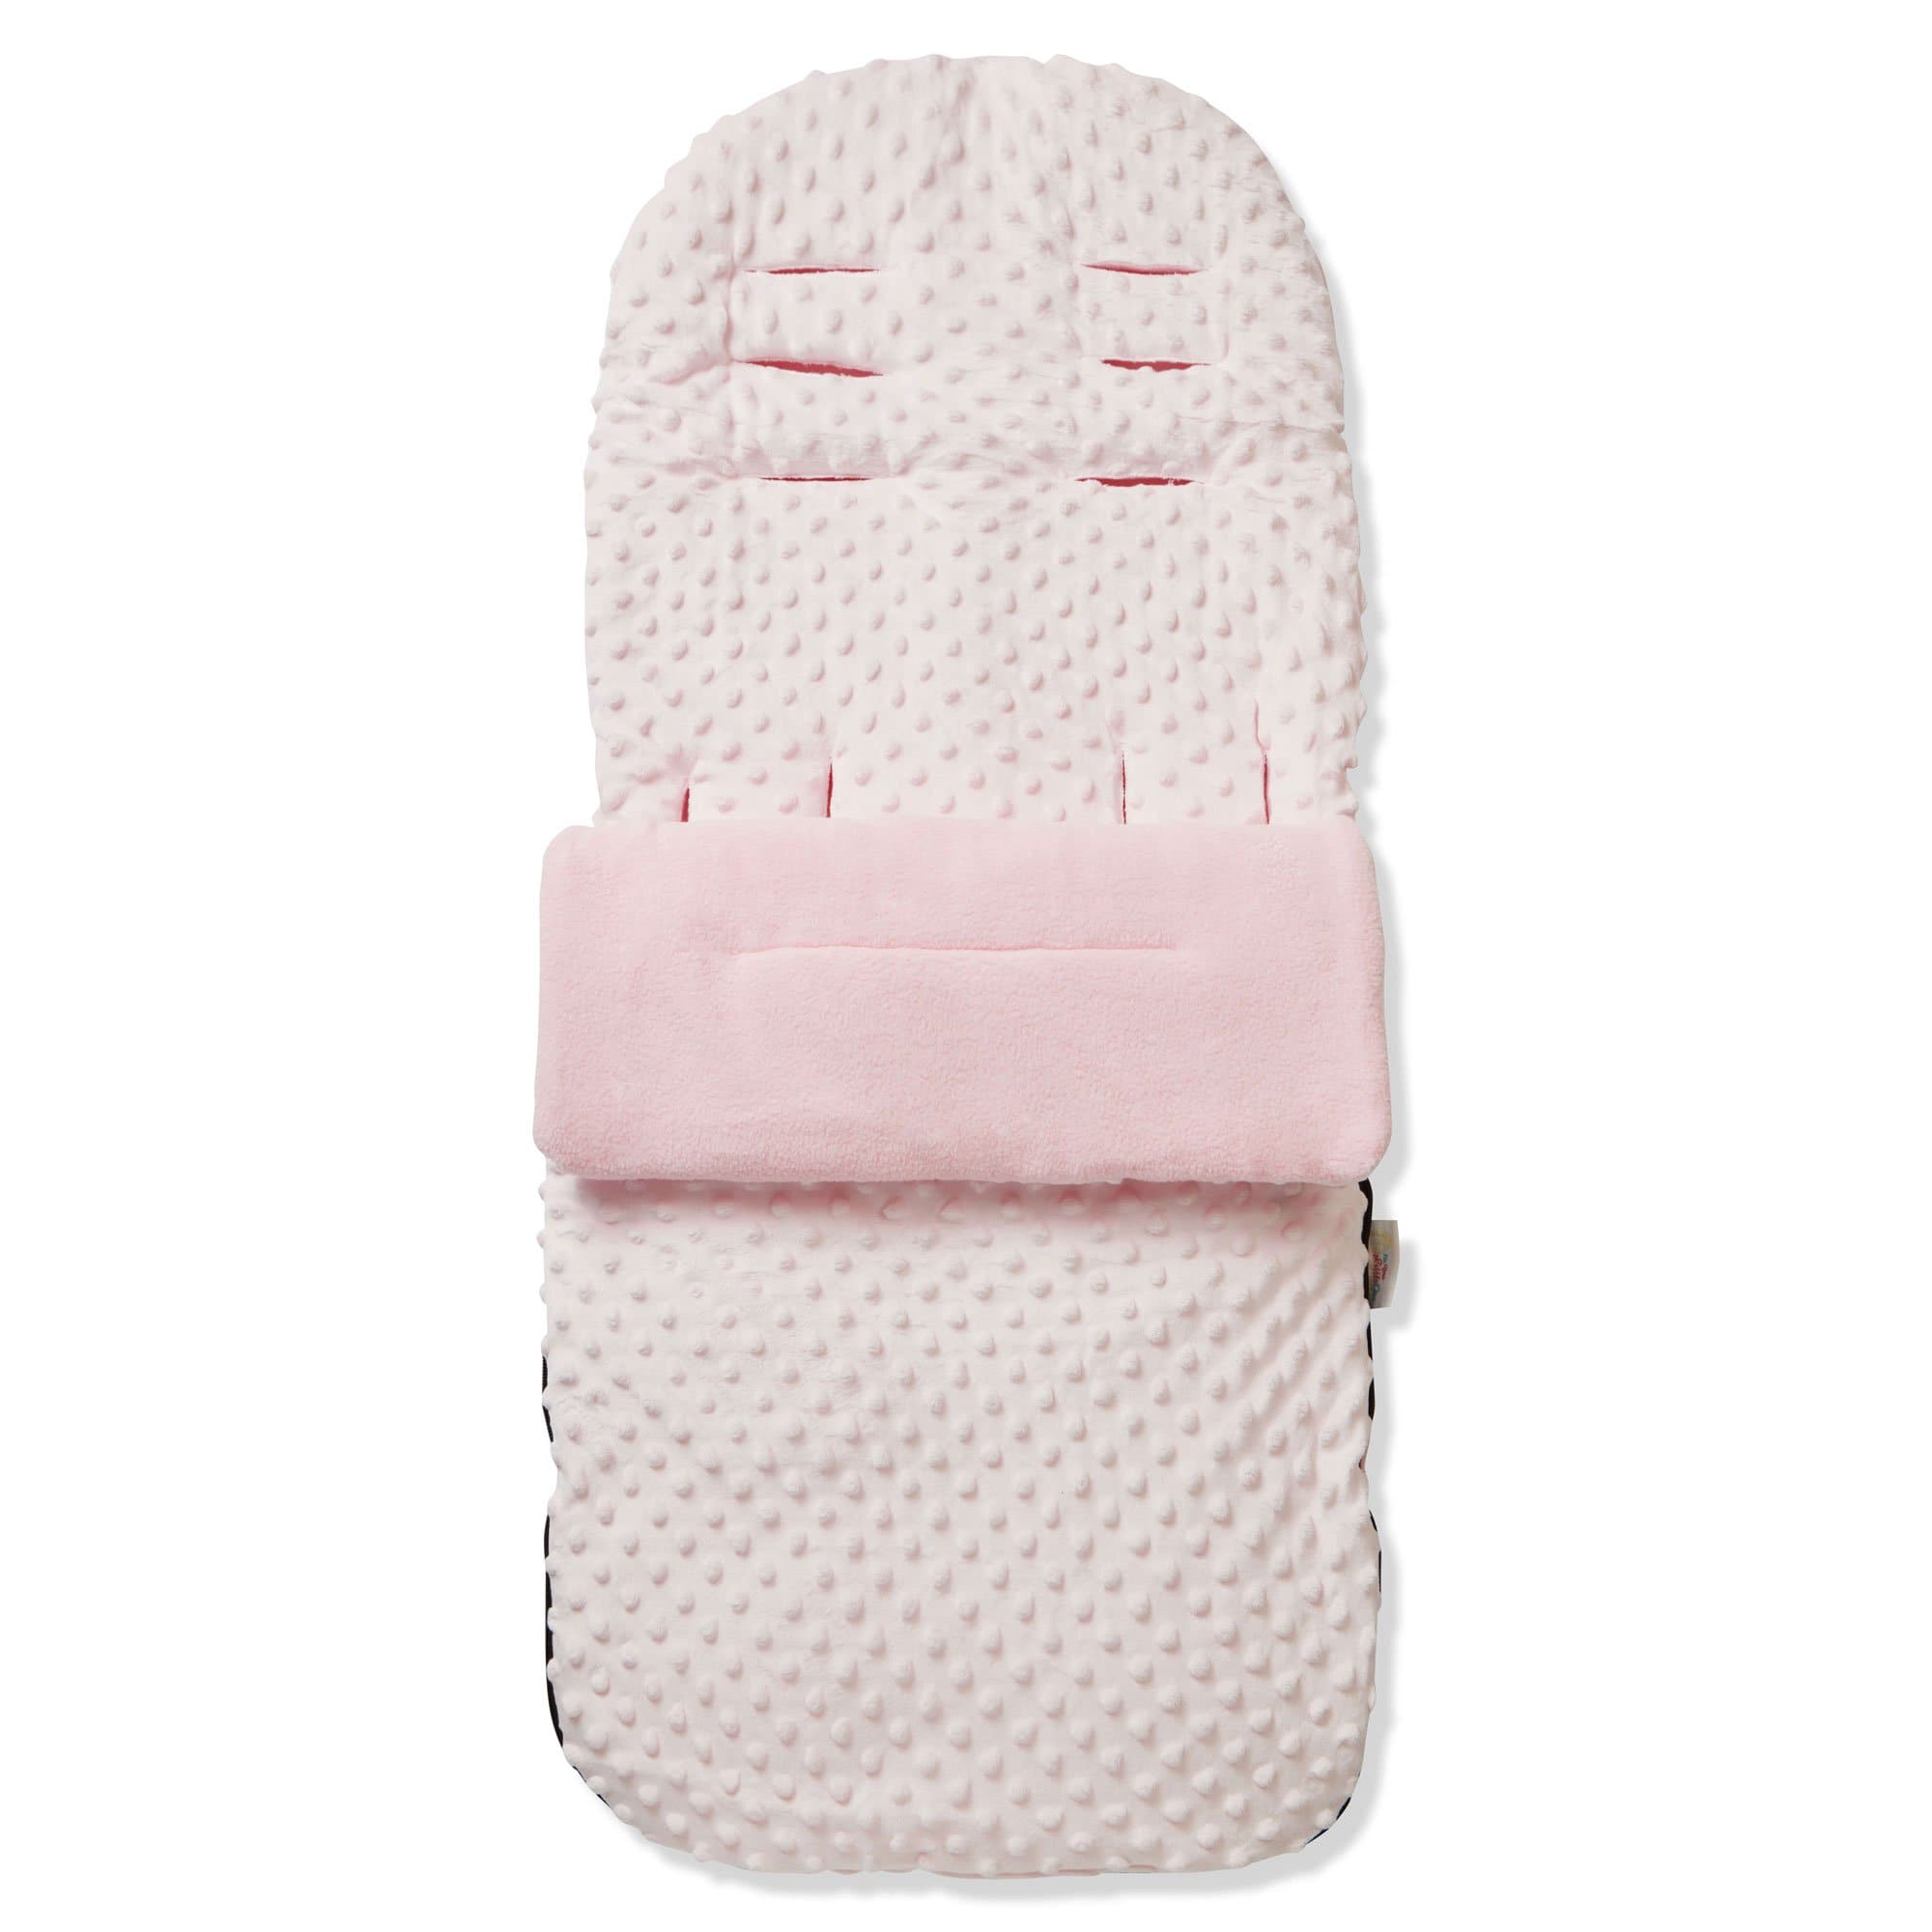 Dimple Footmuff / Cosy Toes Compatible with Joie - Pink / Fits All Models | For Your Little One